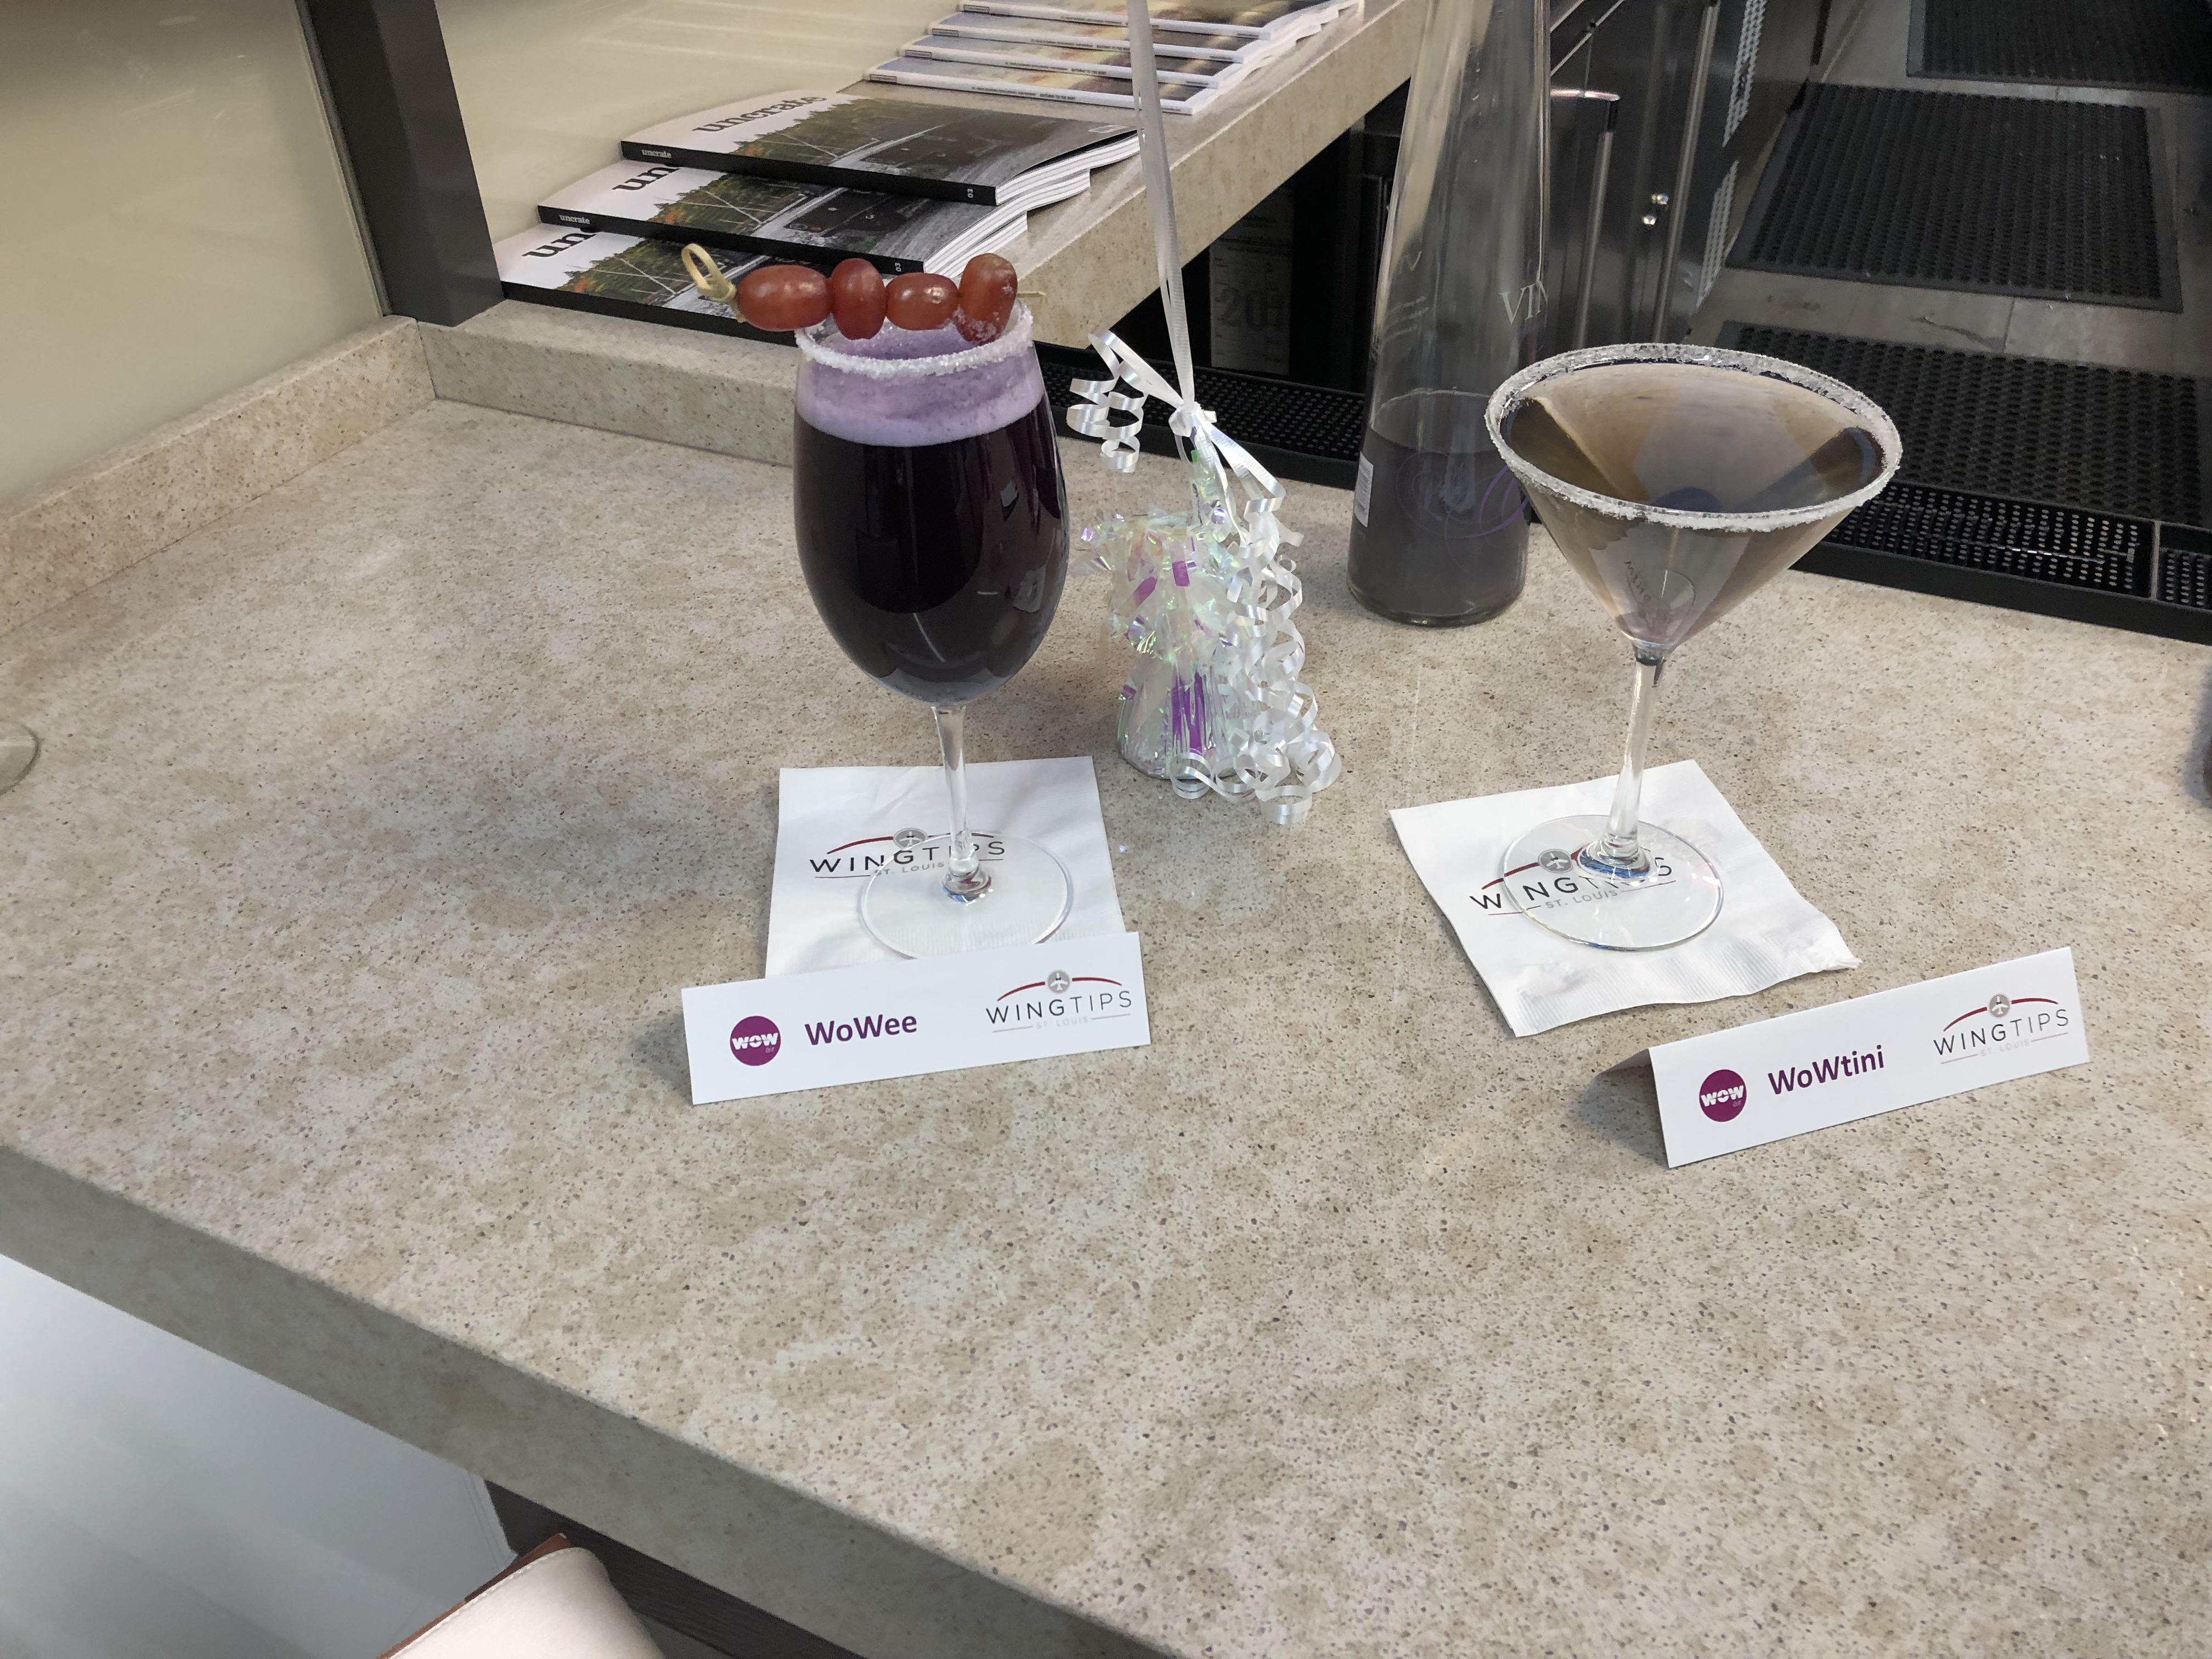 WOWAir themed drinks at the Wingtips Lounge St. Louis